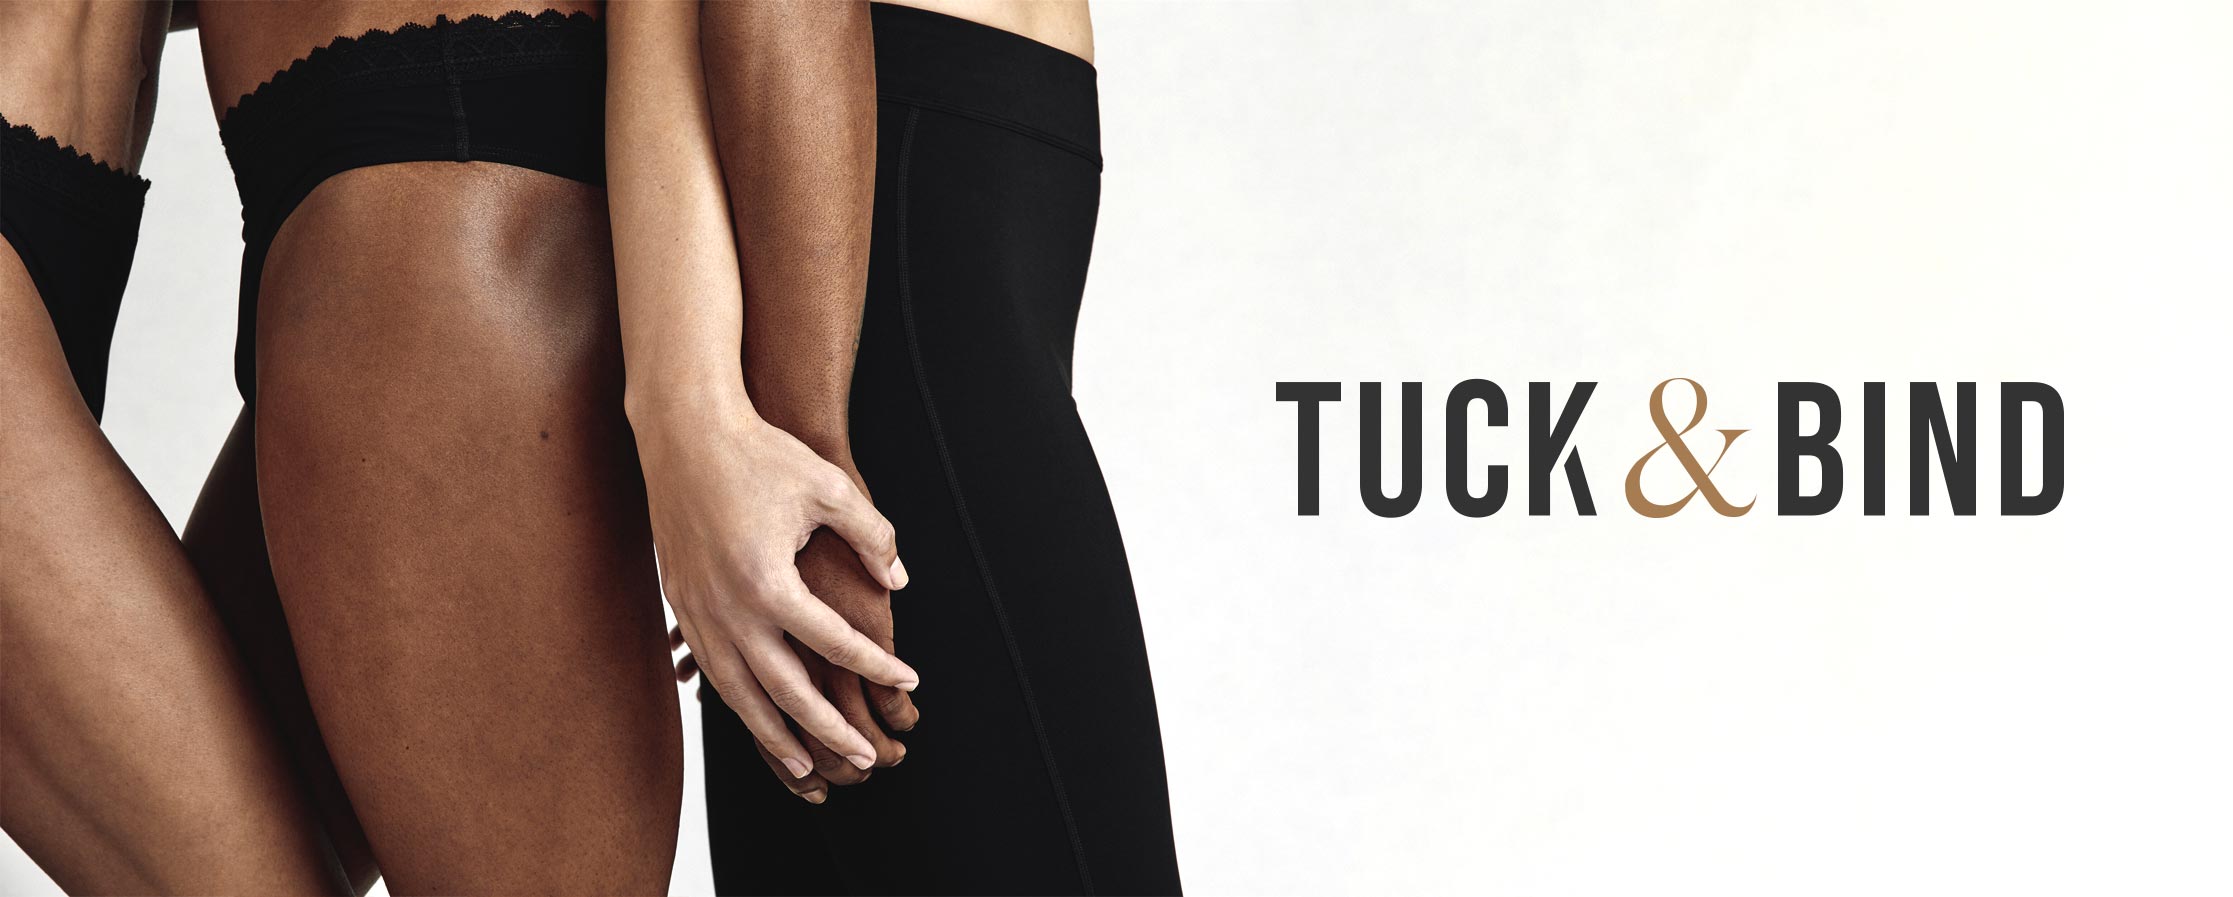 image of peoples legs and holding hands with Tuck & Bind logo